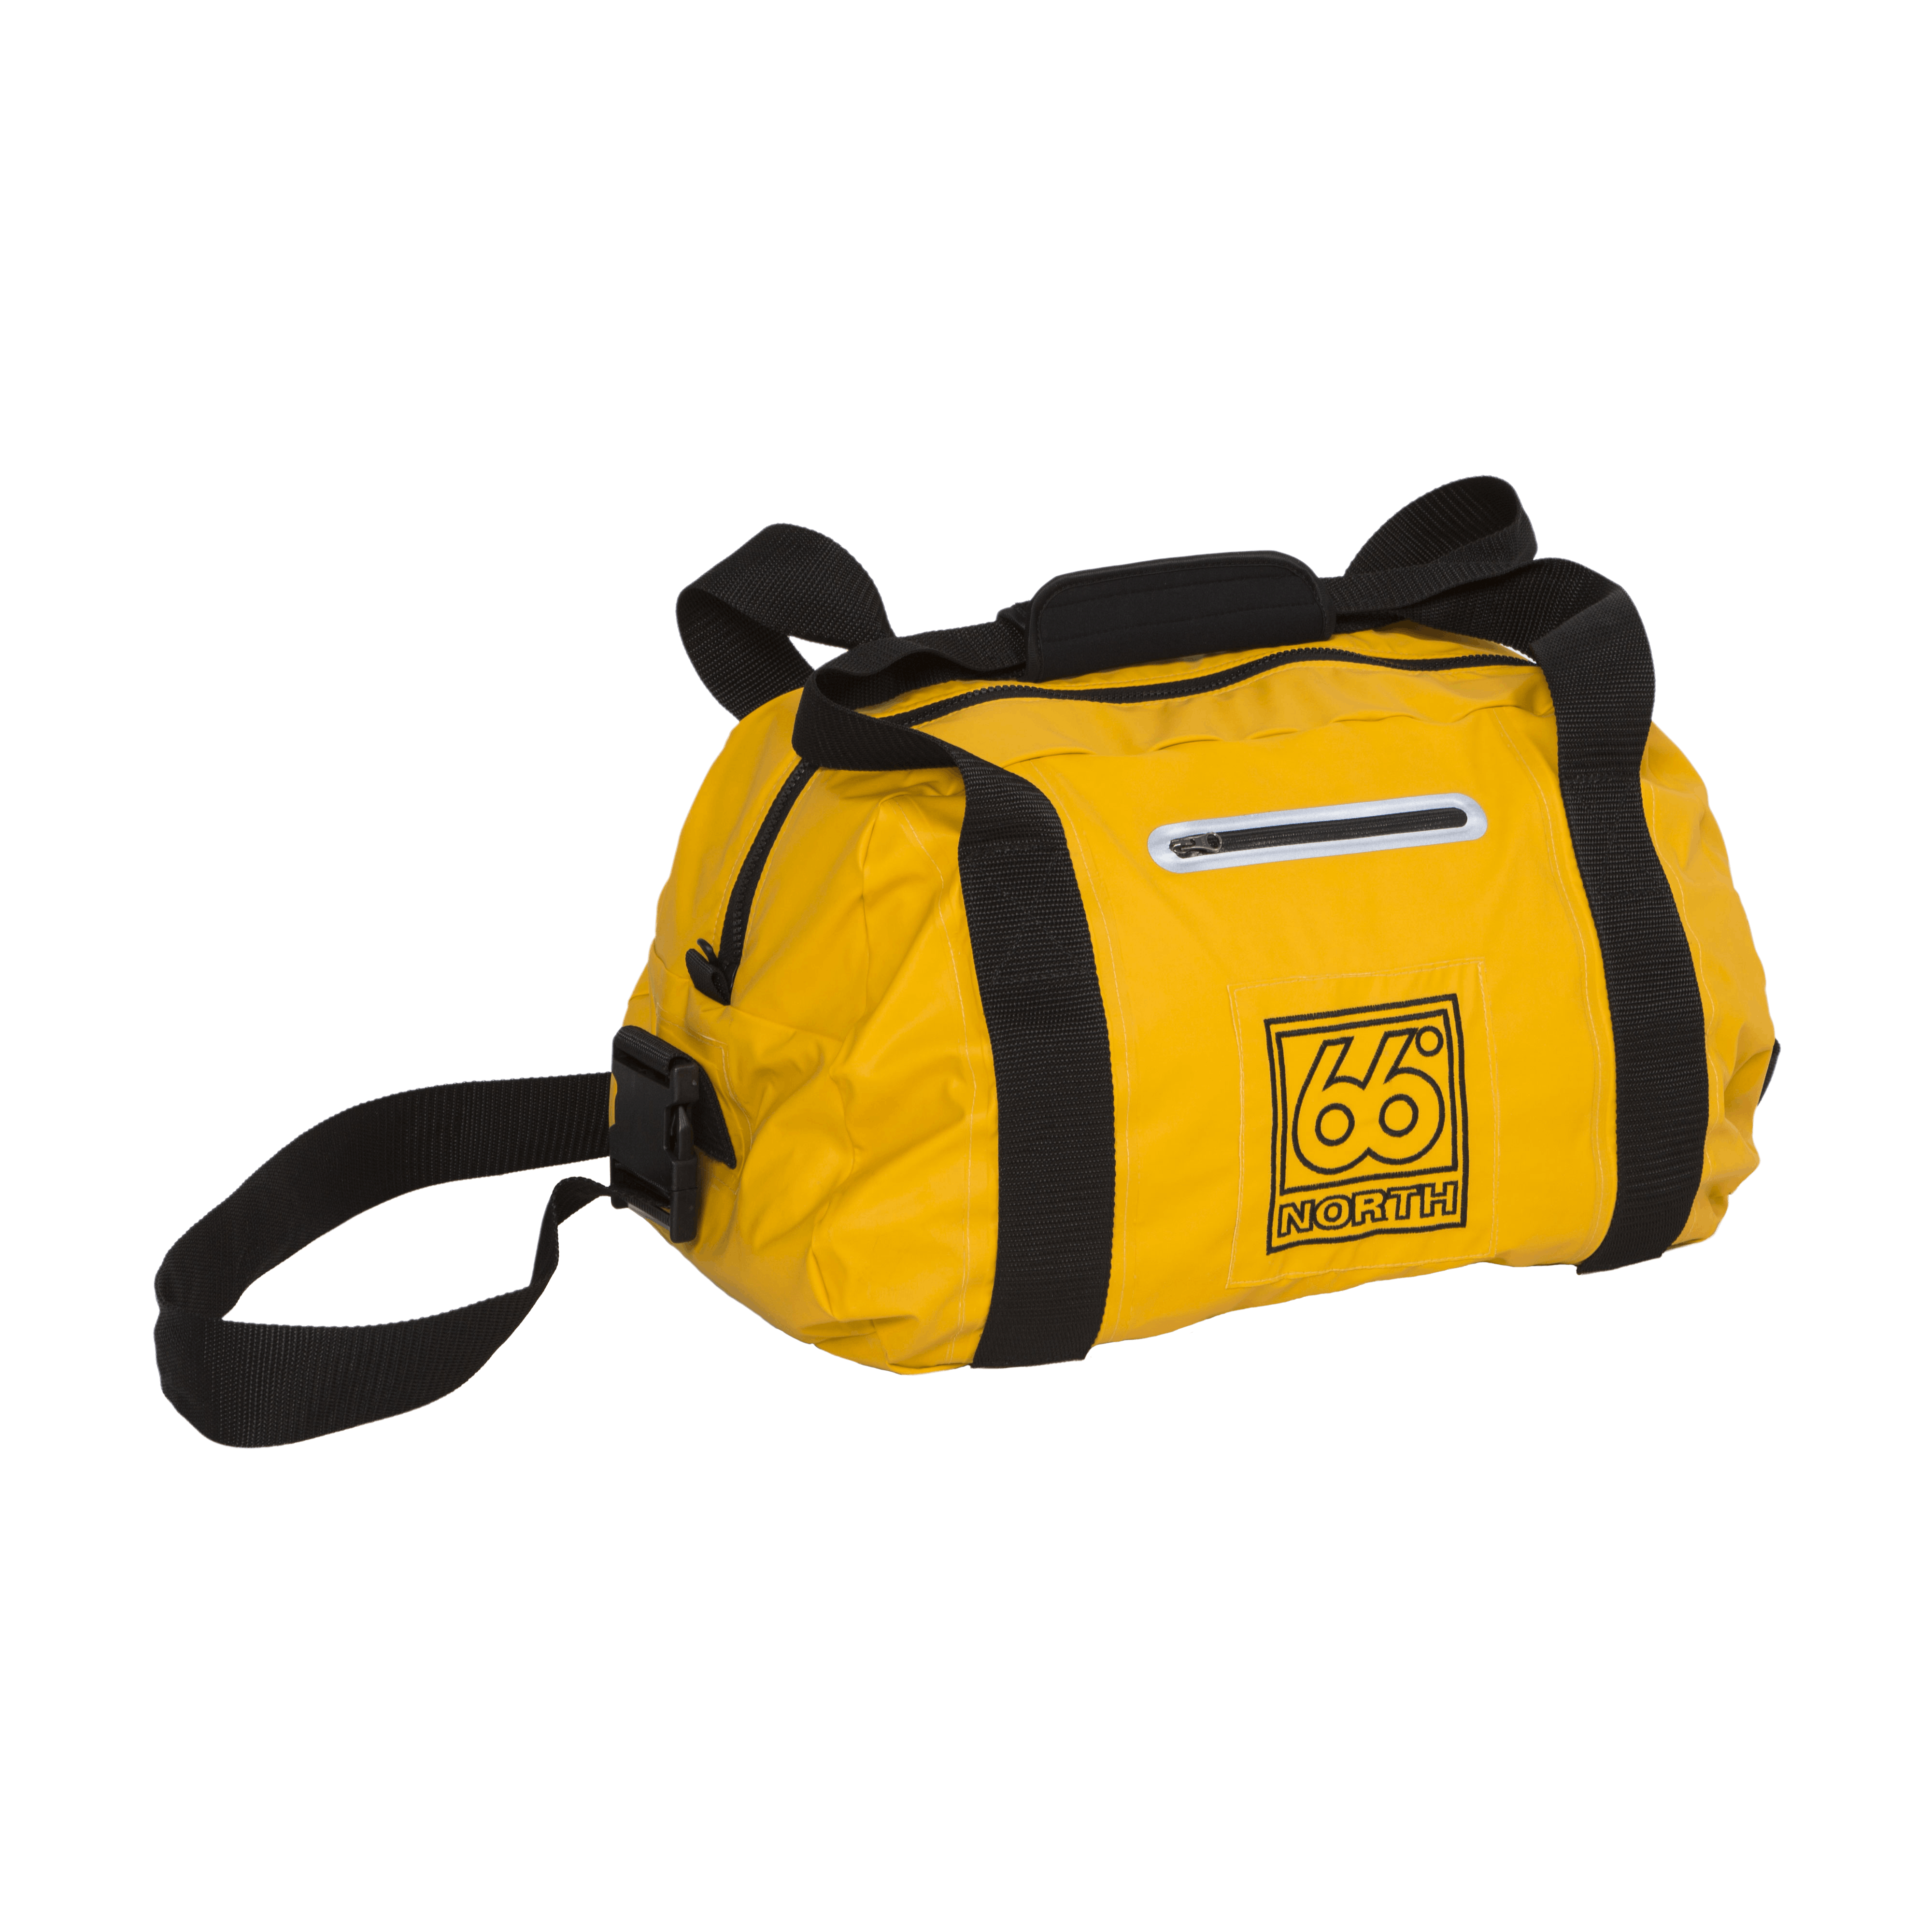 66 North Womens Sports Bag Accessories - Retro Yellow - One Size